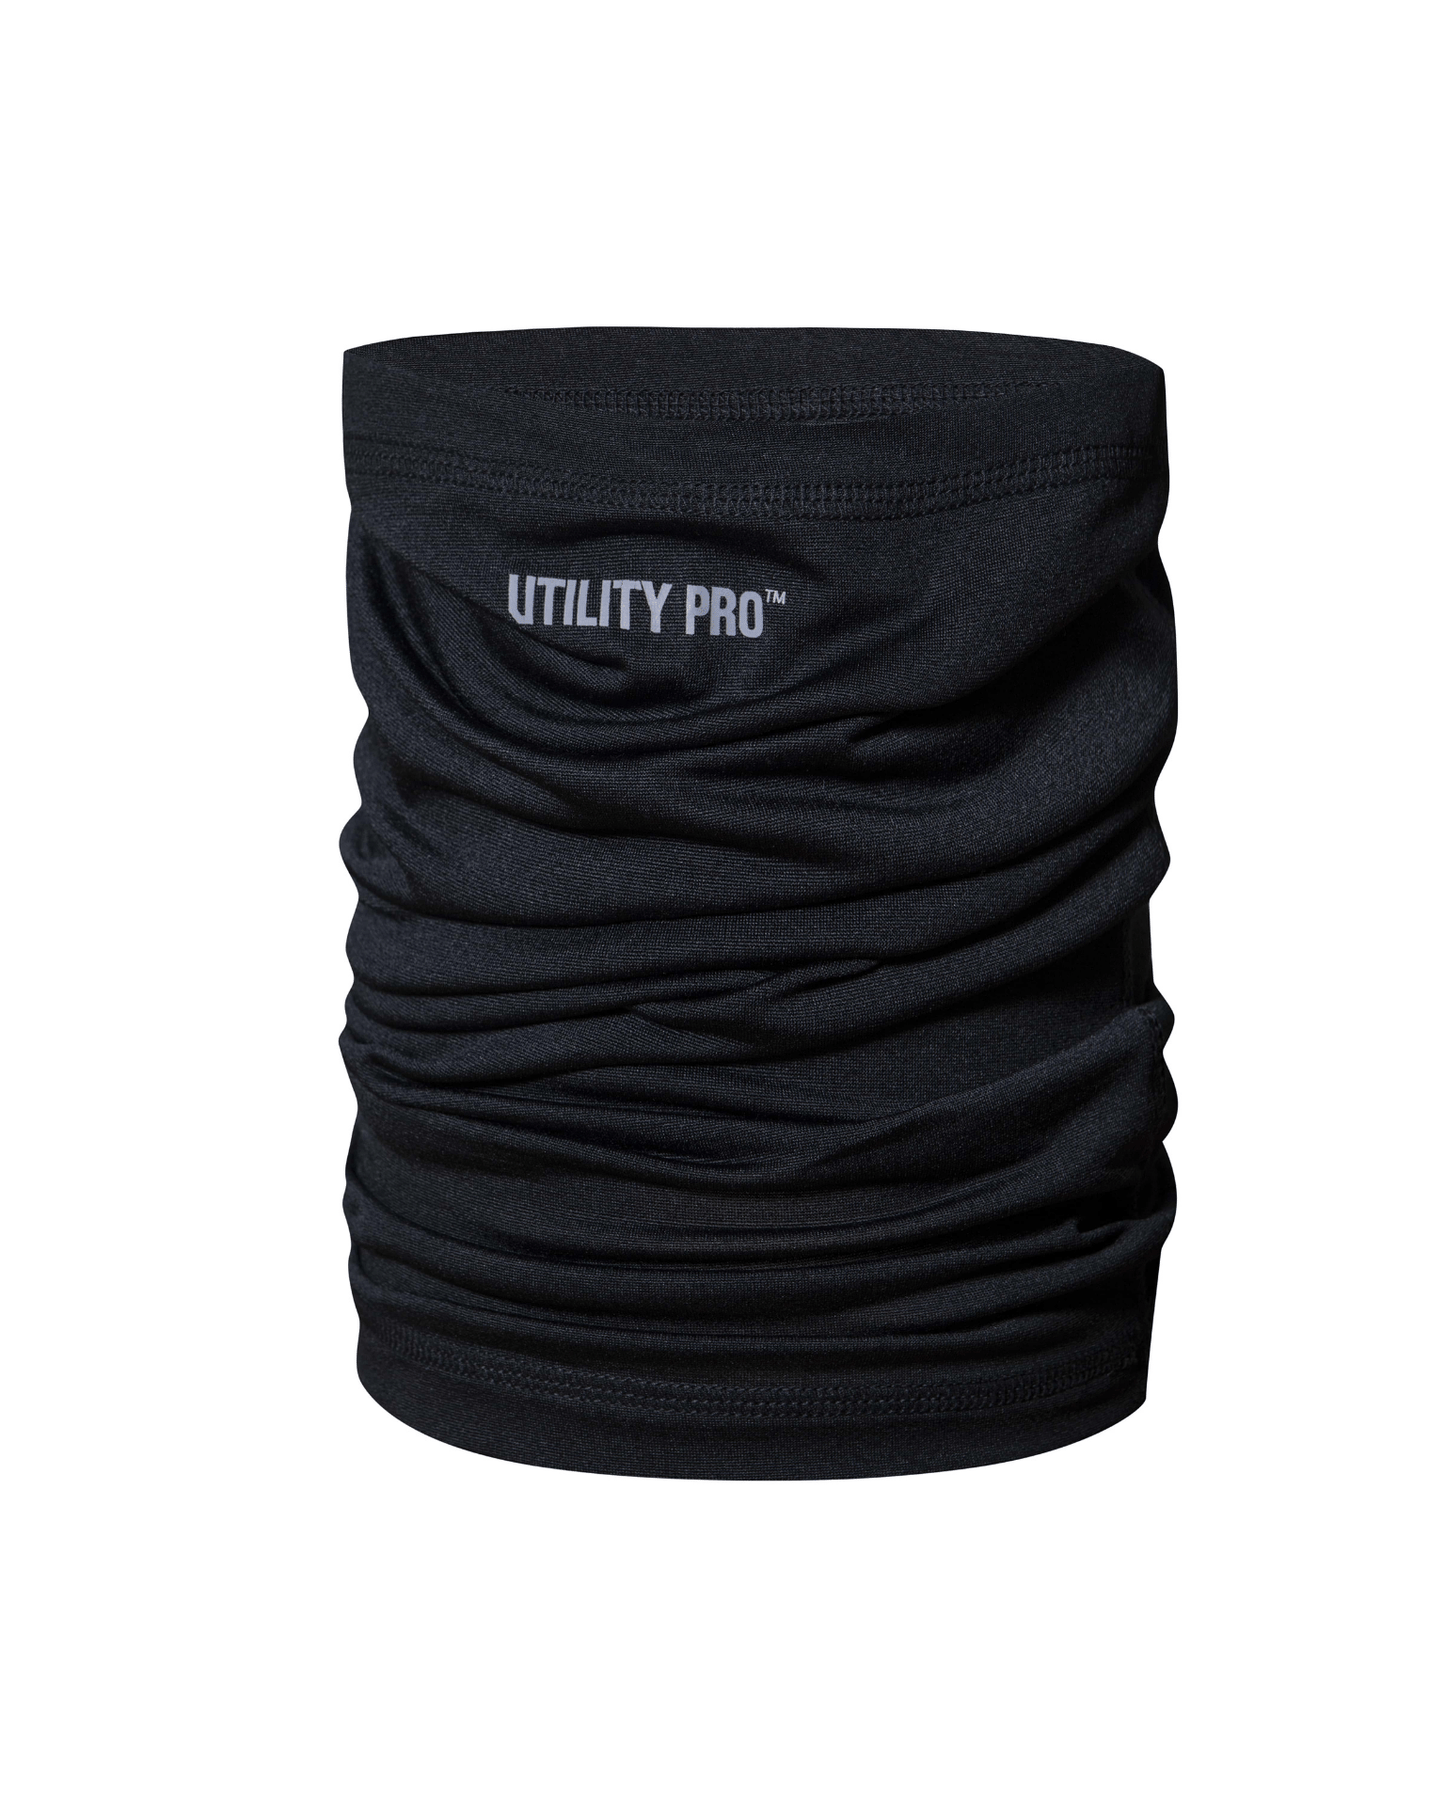 UPA937 Breathable Neck Gaiter in Black (6-pack)